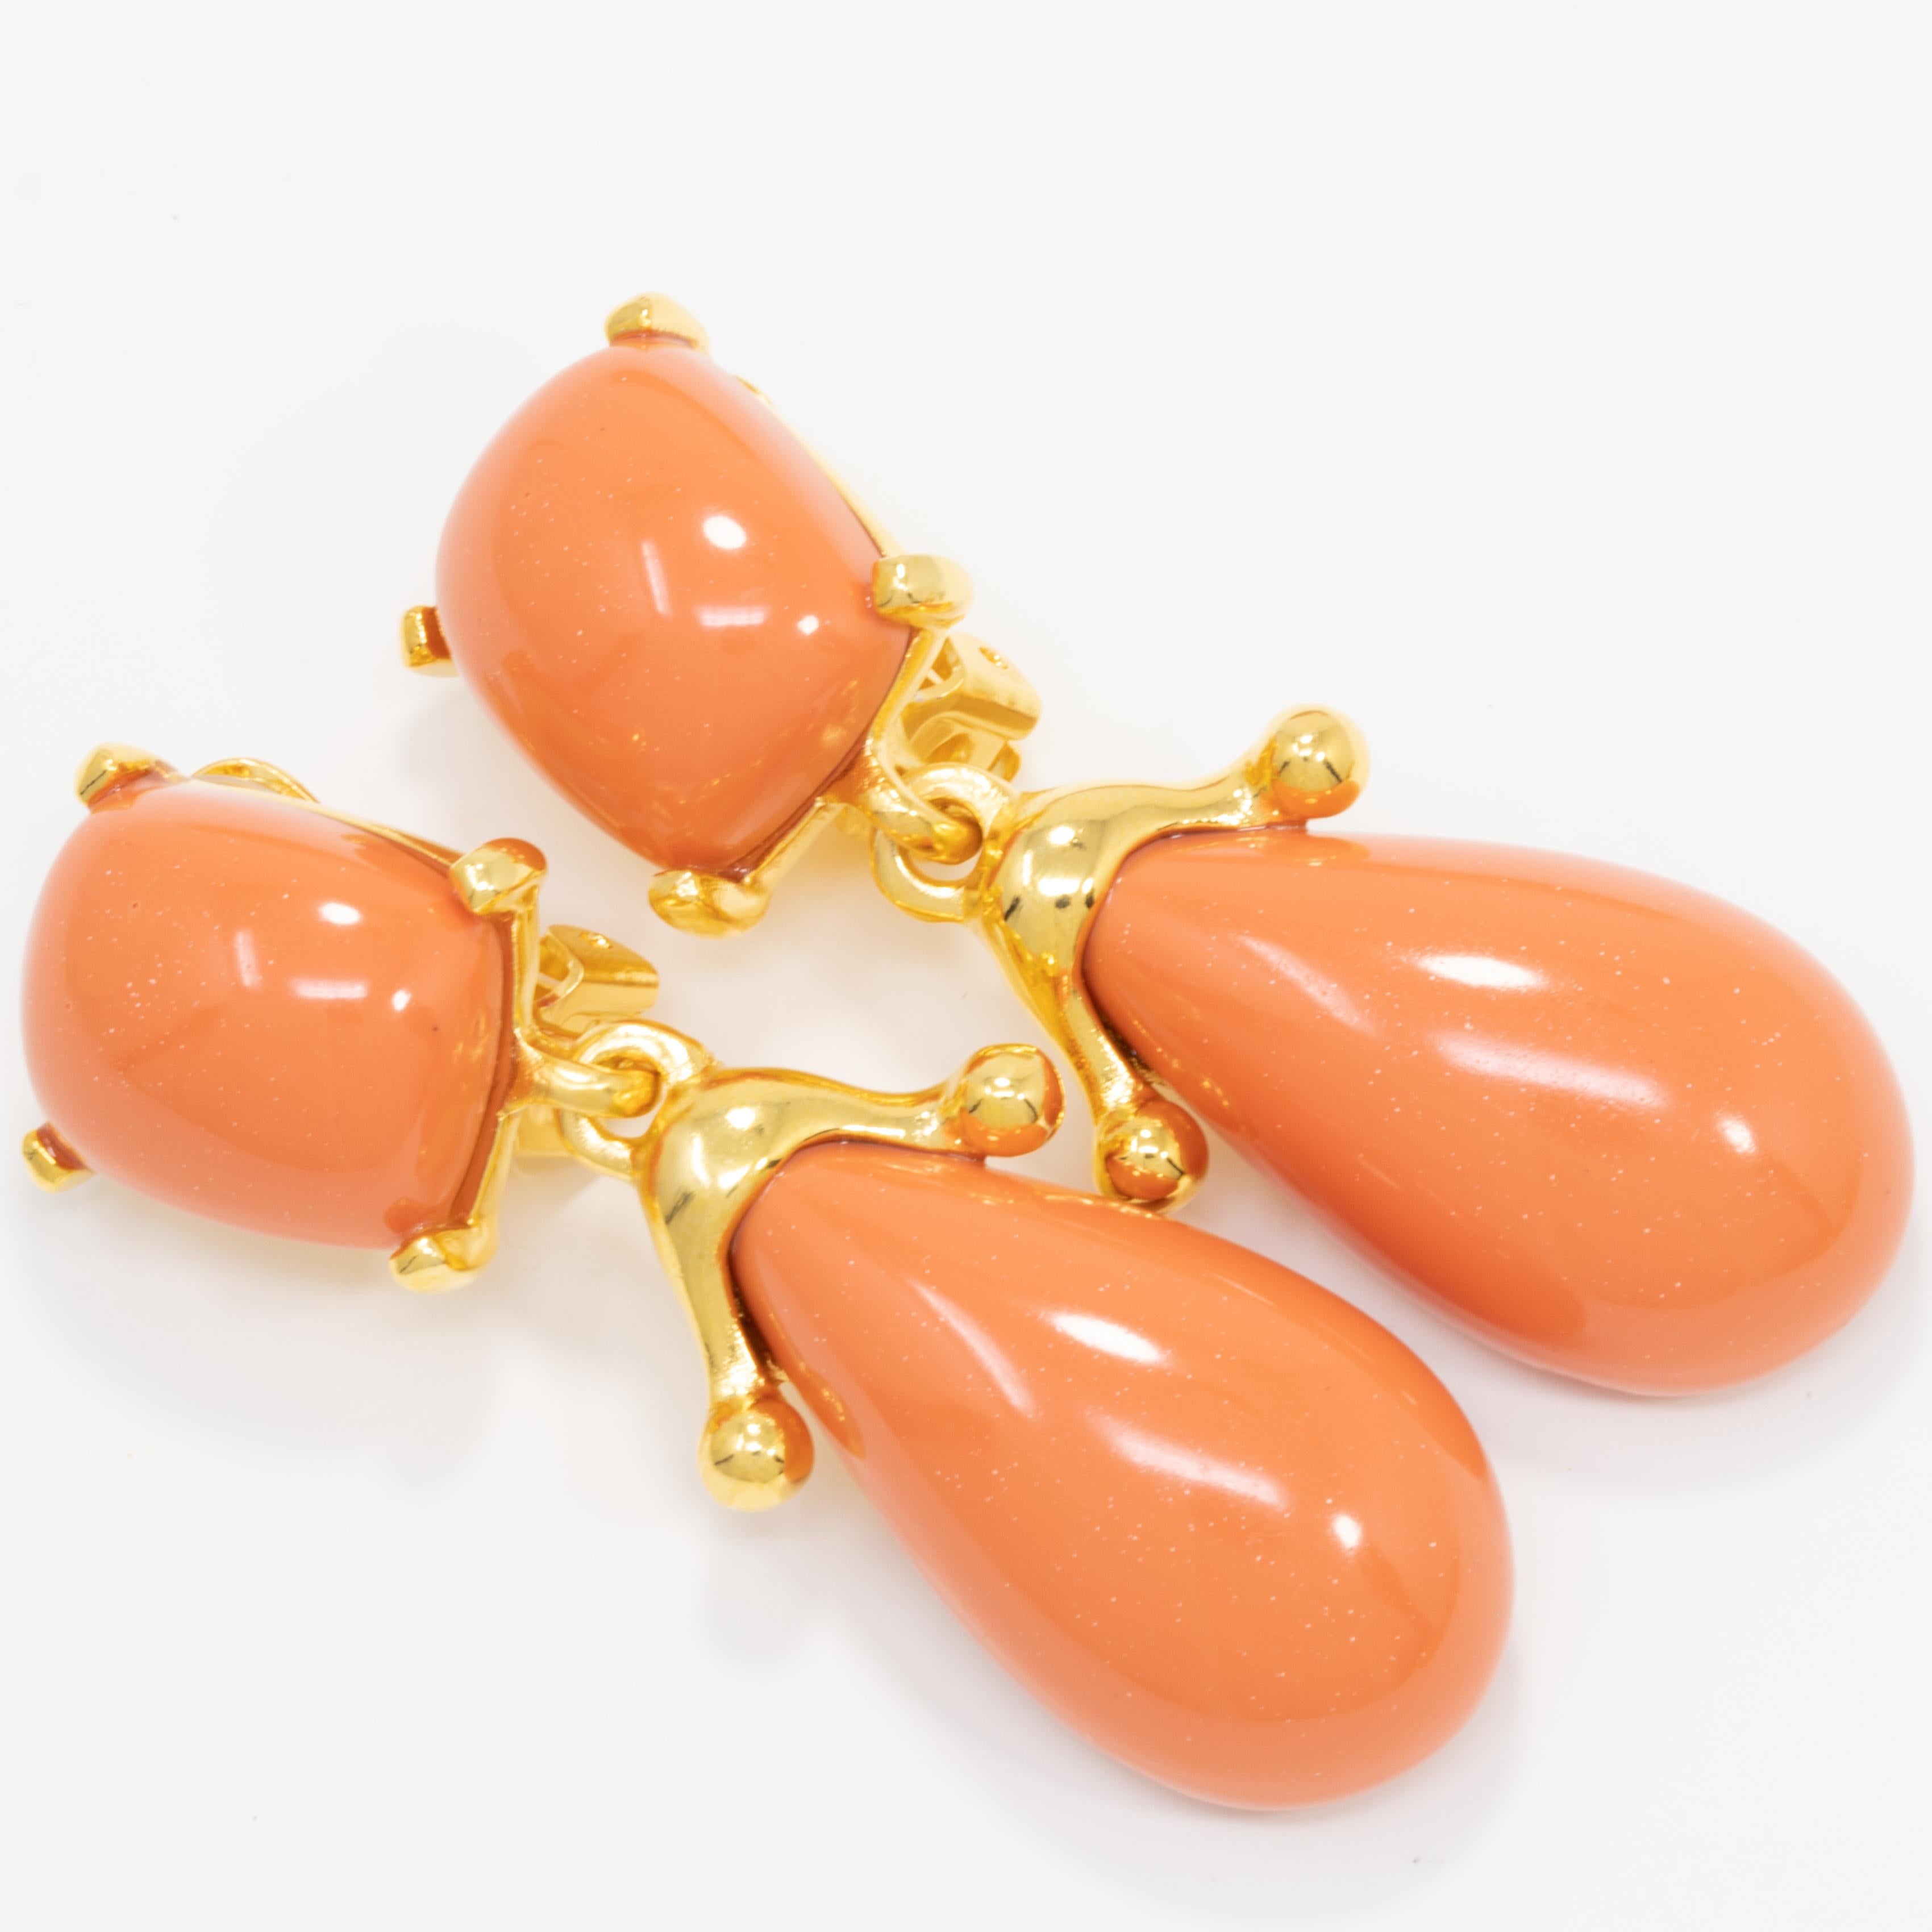 A coral cabochon prong-set in a gold clip on earring, with a dangling tear-shaped cabochon. A stylish pair of Kenneth Jay Lane earrings to accentuate any outfit!

Hallmarks: KJL, Made in USA